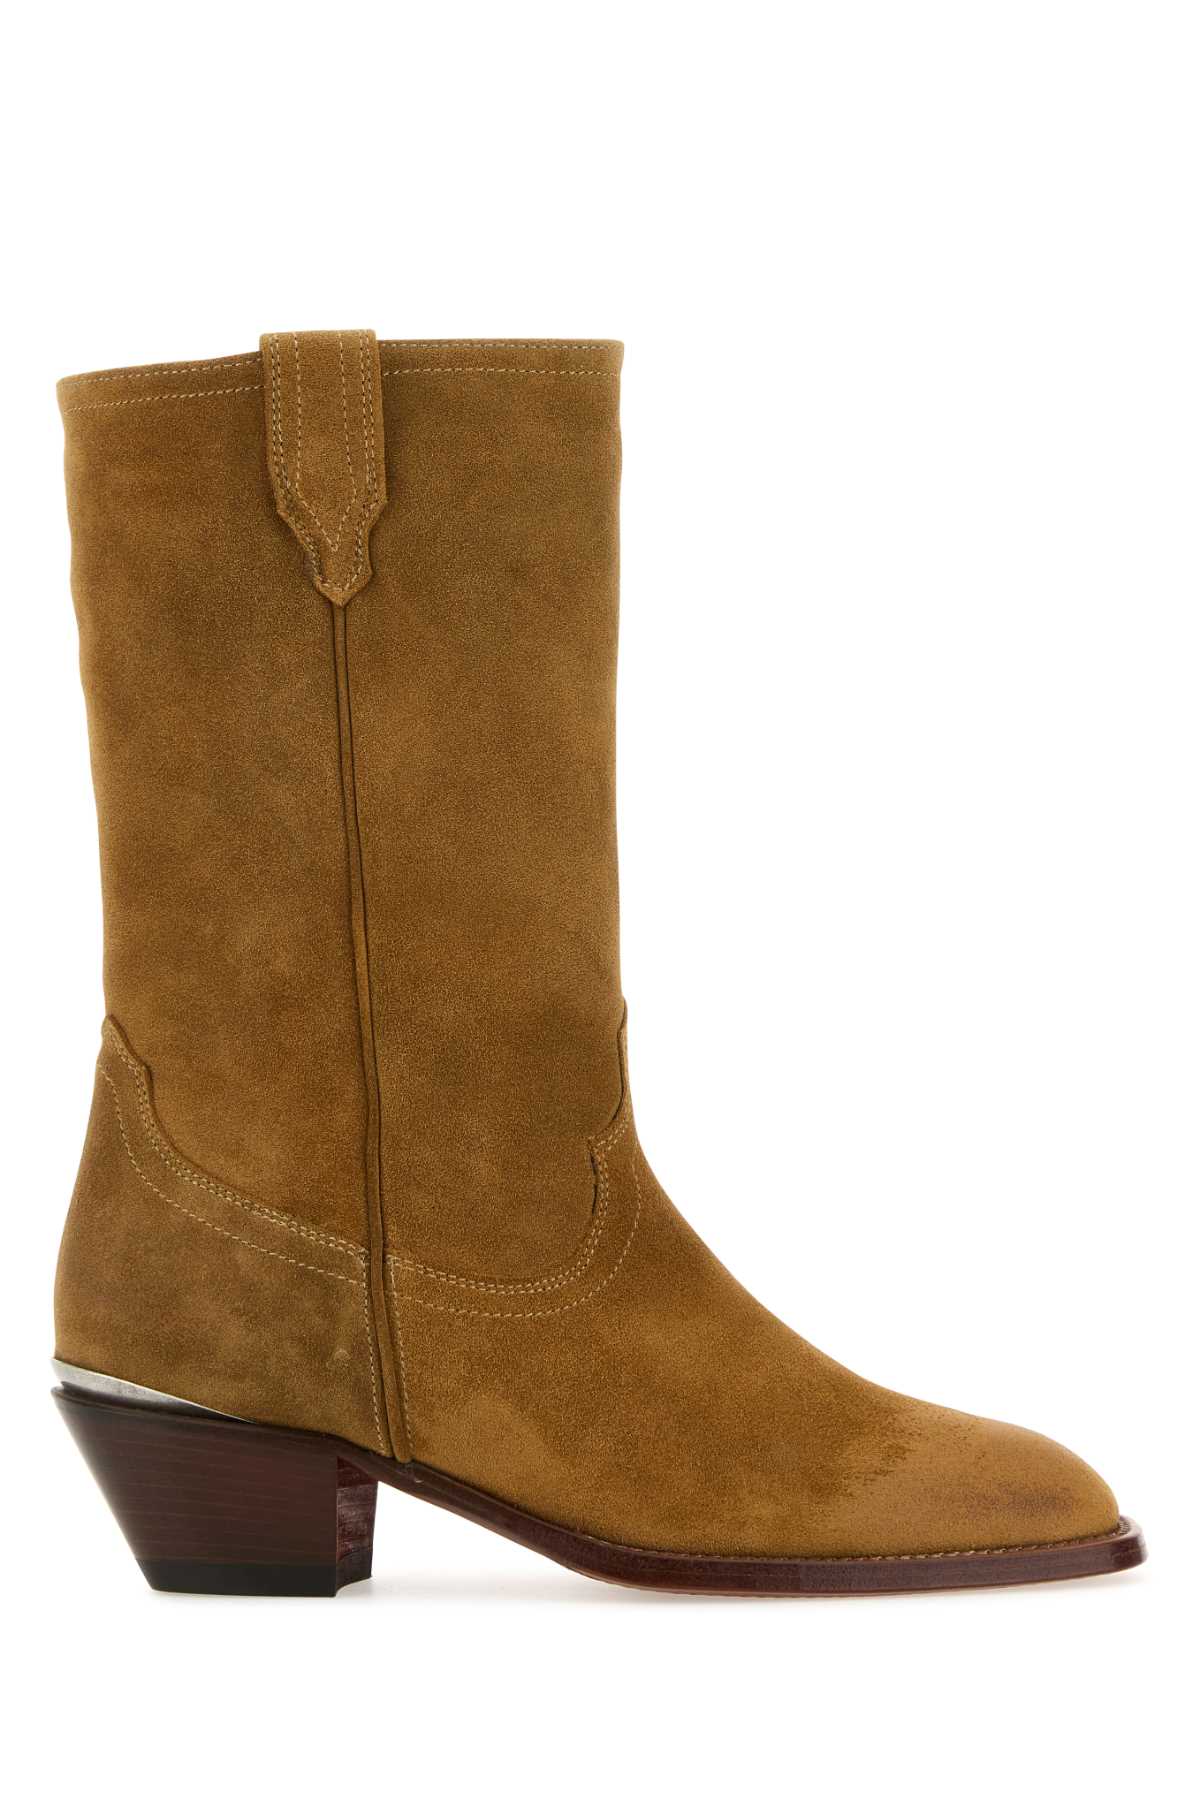 Camel Suede Durango Ankle Boots